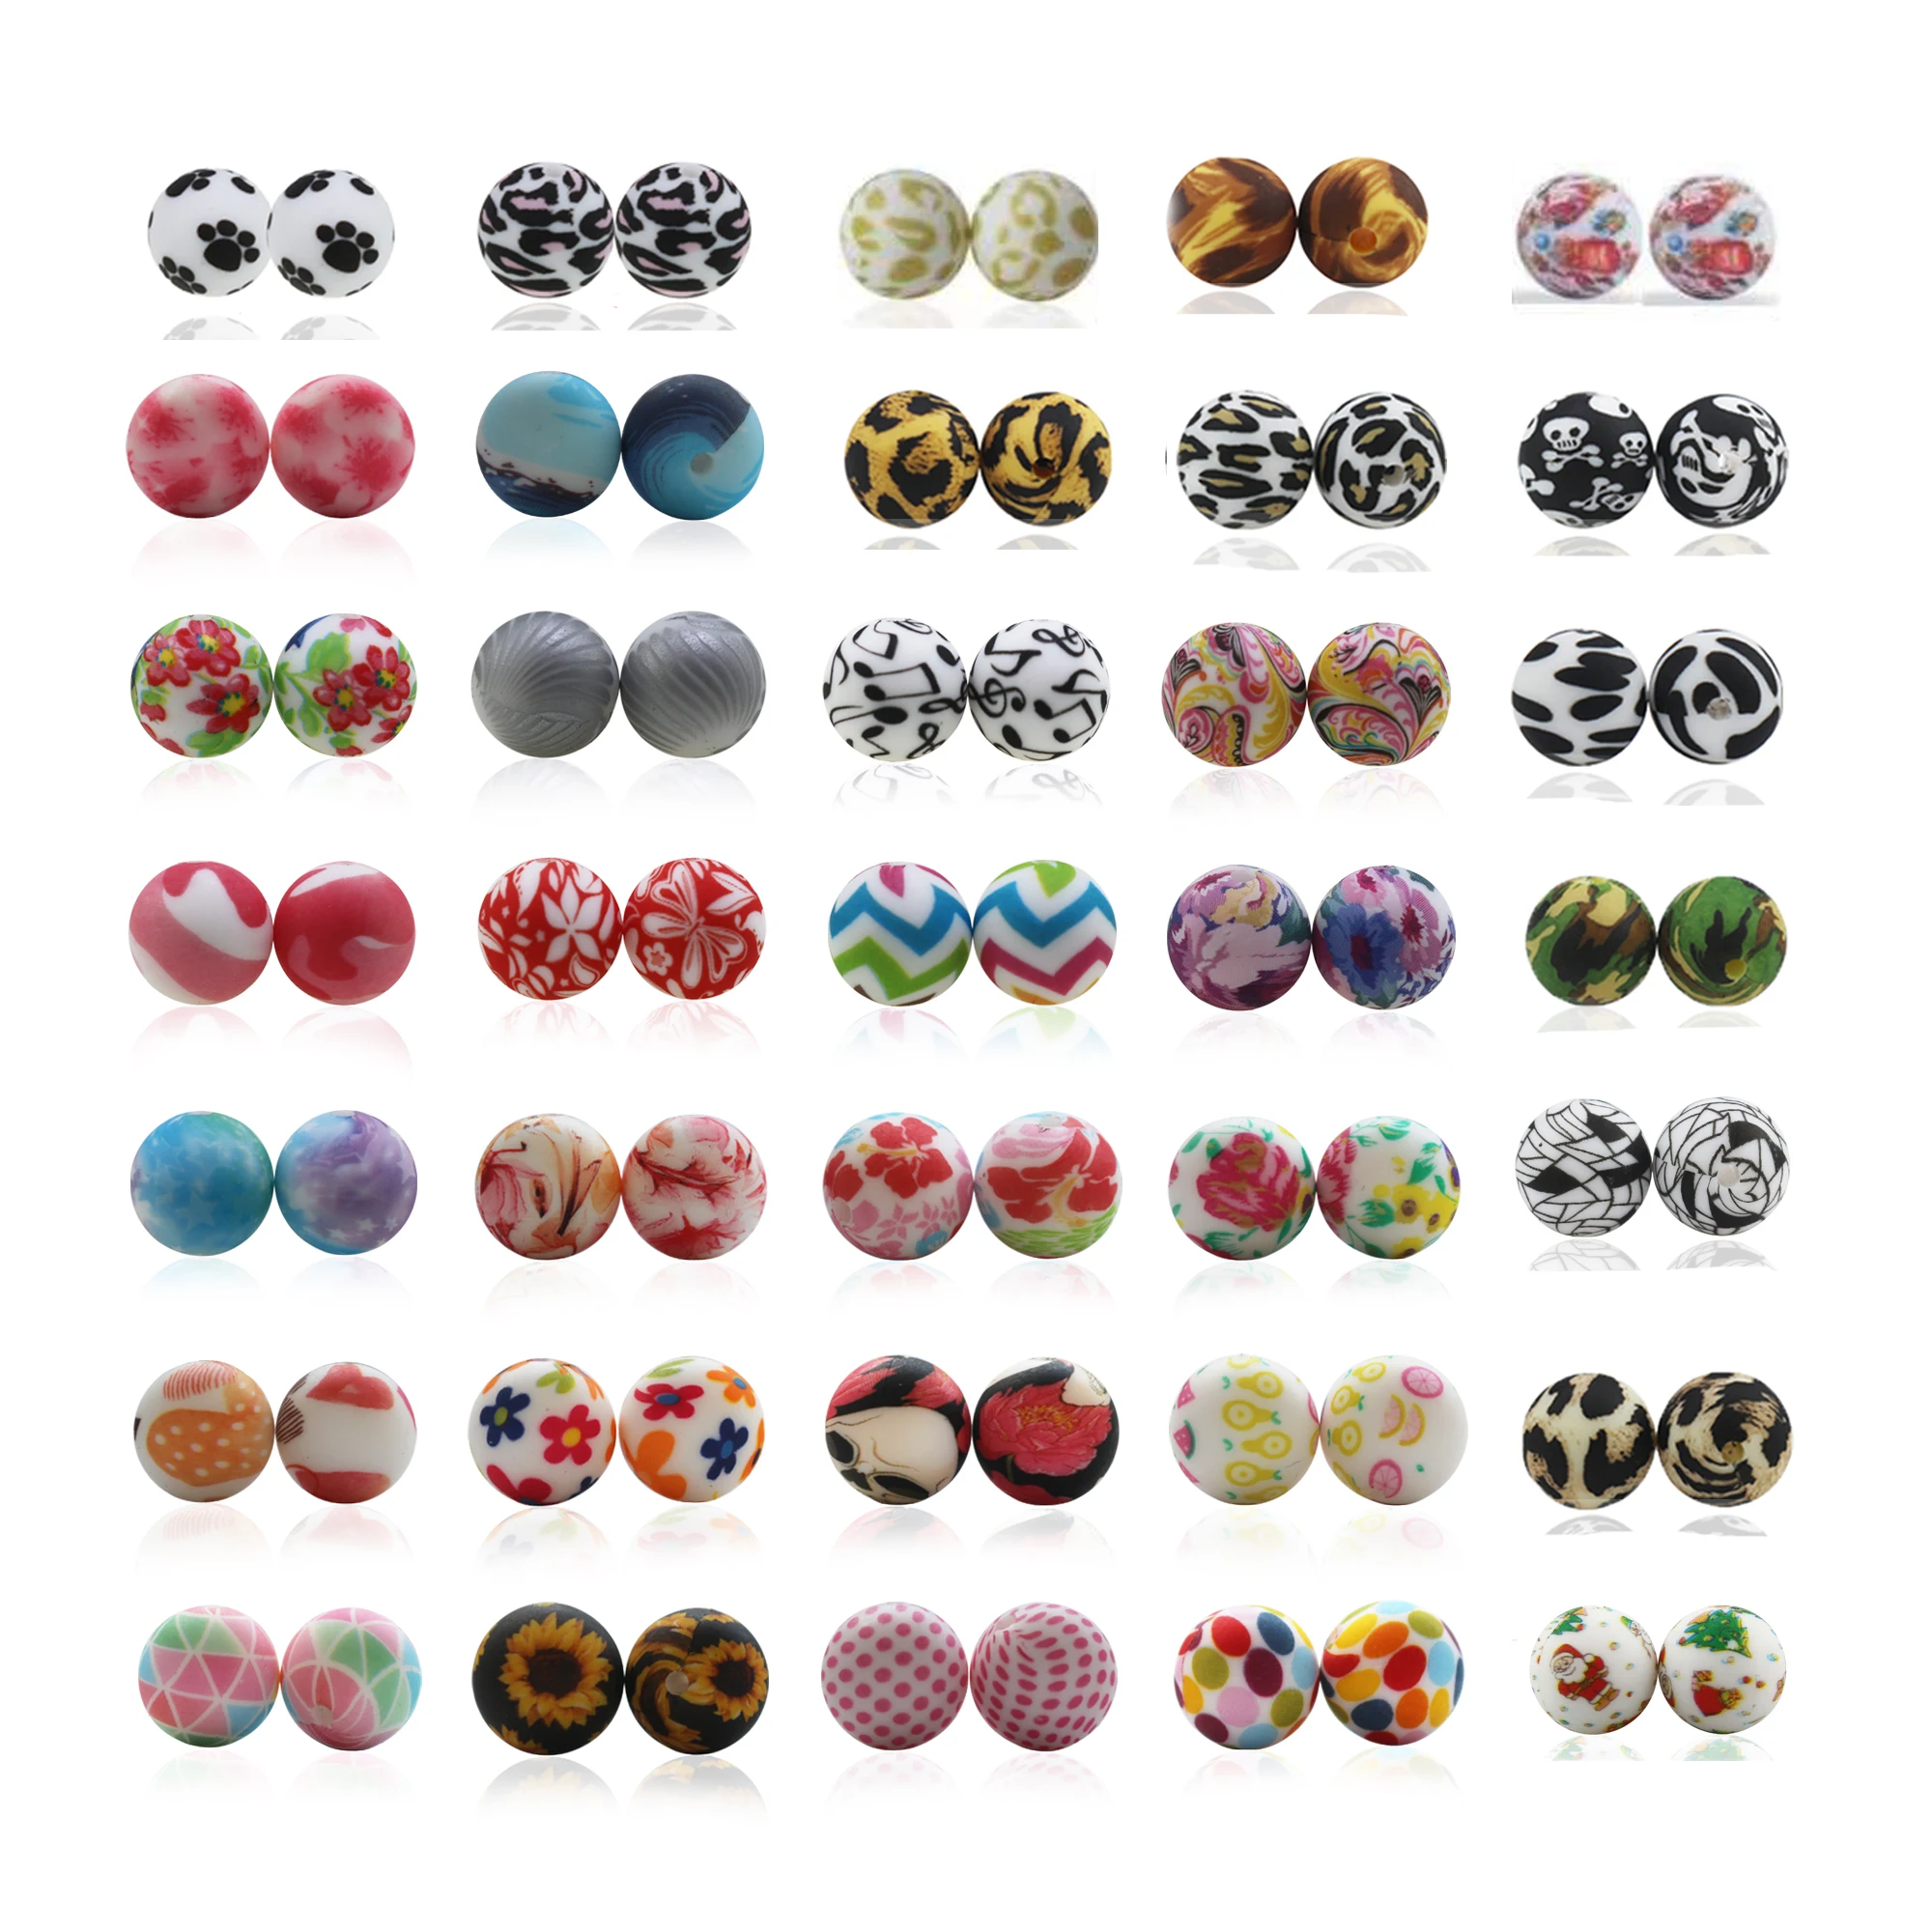 

New Desgin 12mm Silicone Teether Beads Leopard Print BPA Free Chewable Teething Beads Pattern DIY Necklace 15mm Silicone Beads, Picture colors, customized